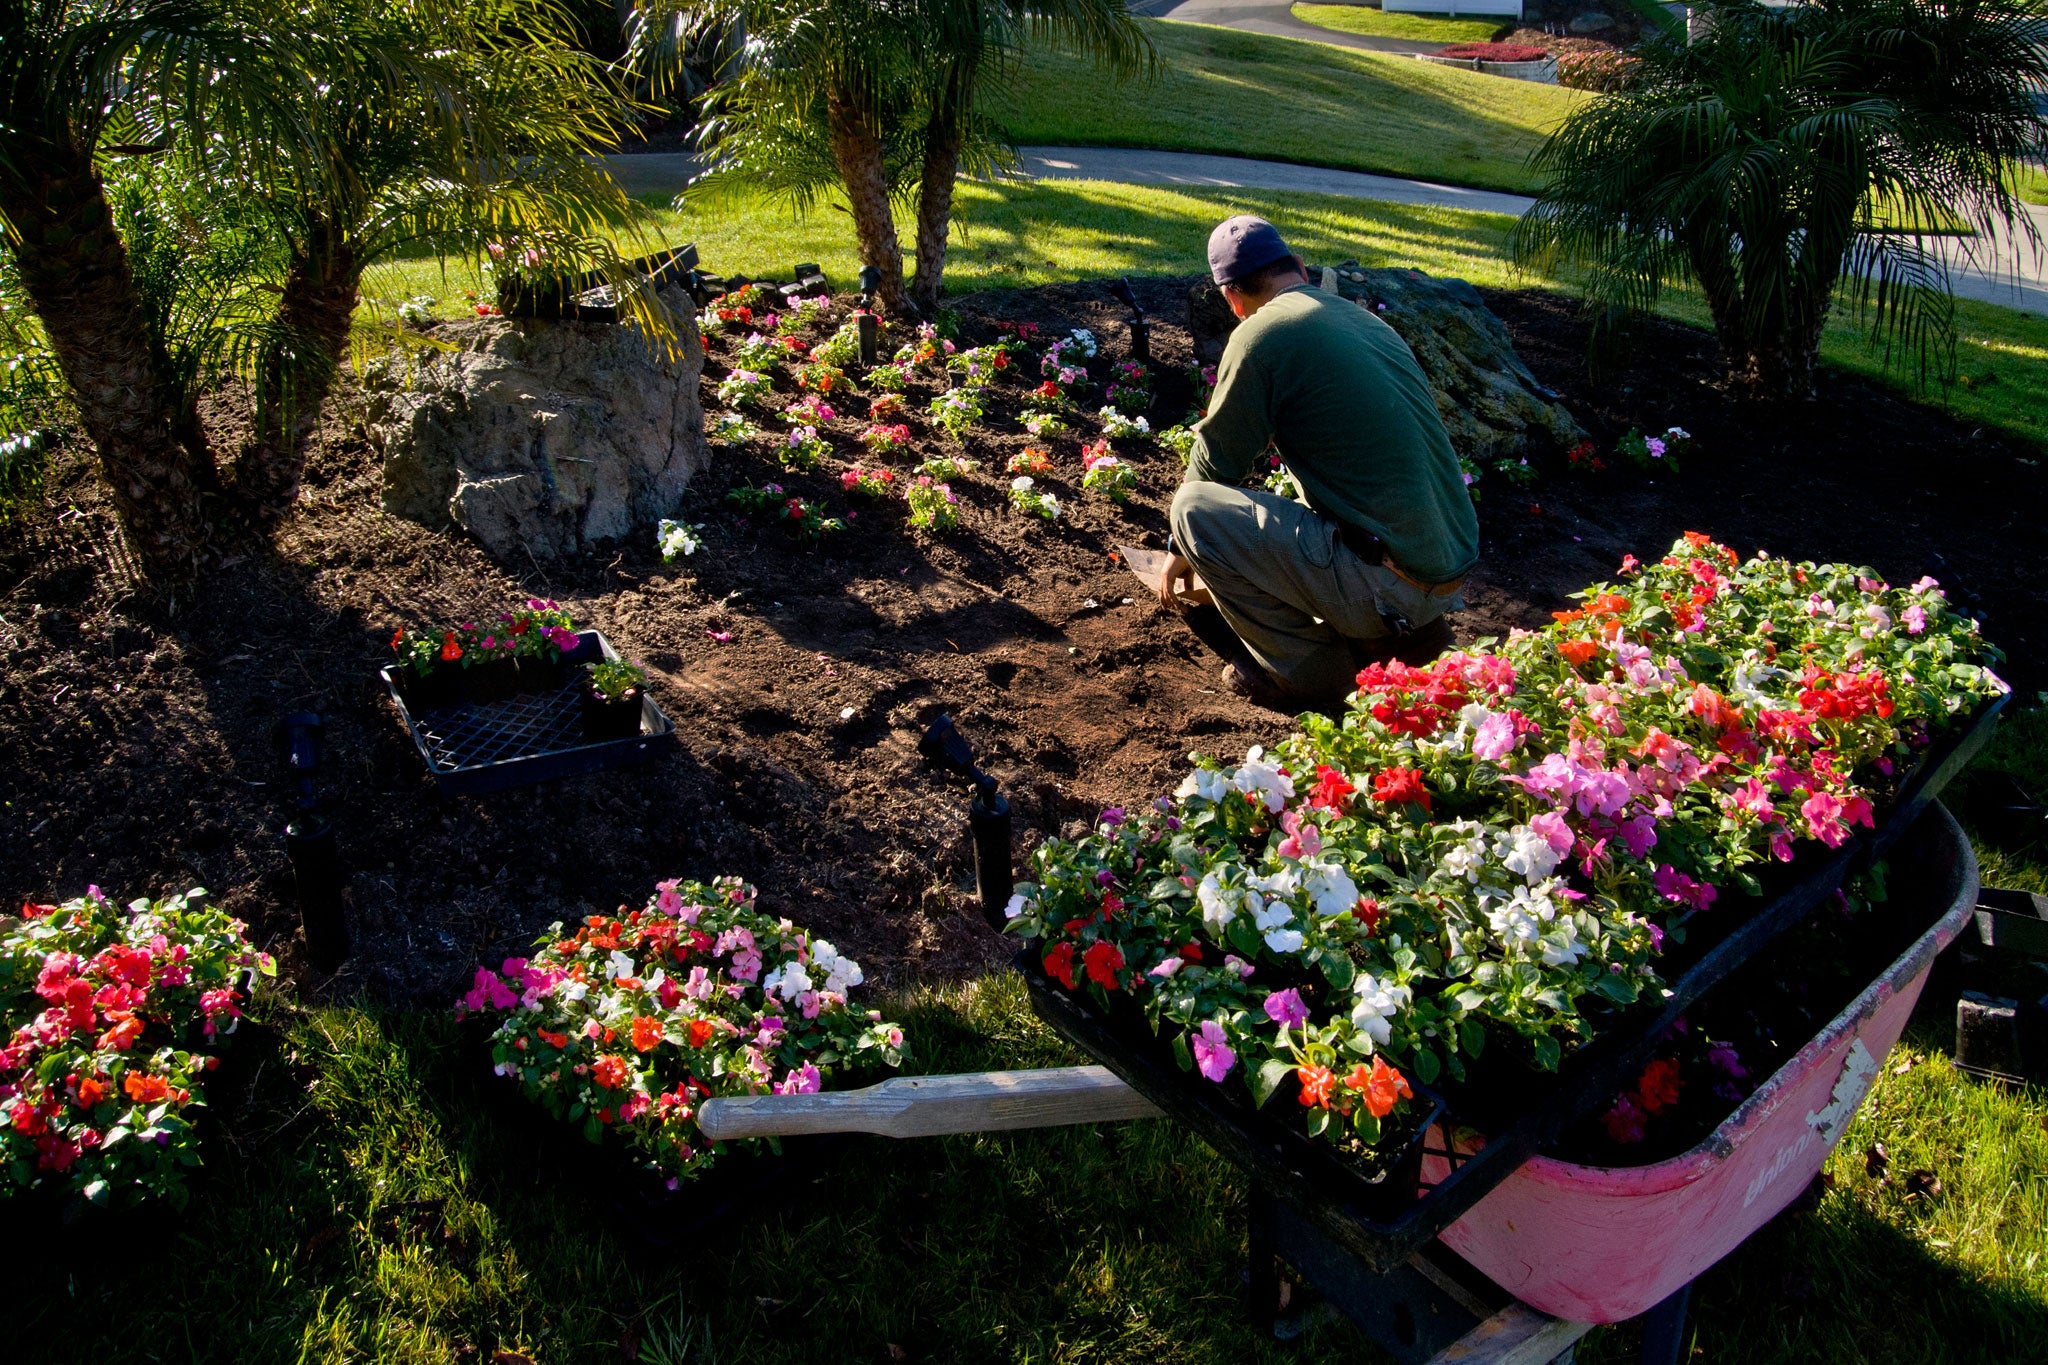 Gardeners scored high in the Government's happiness survey